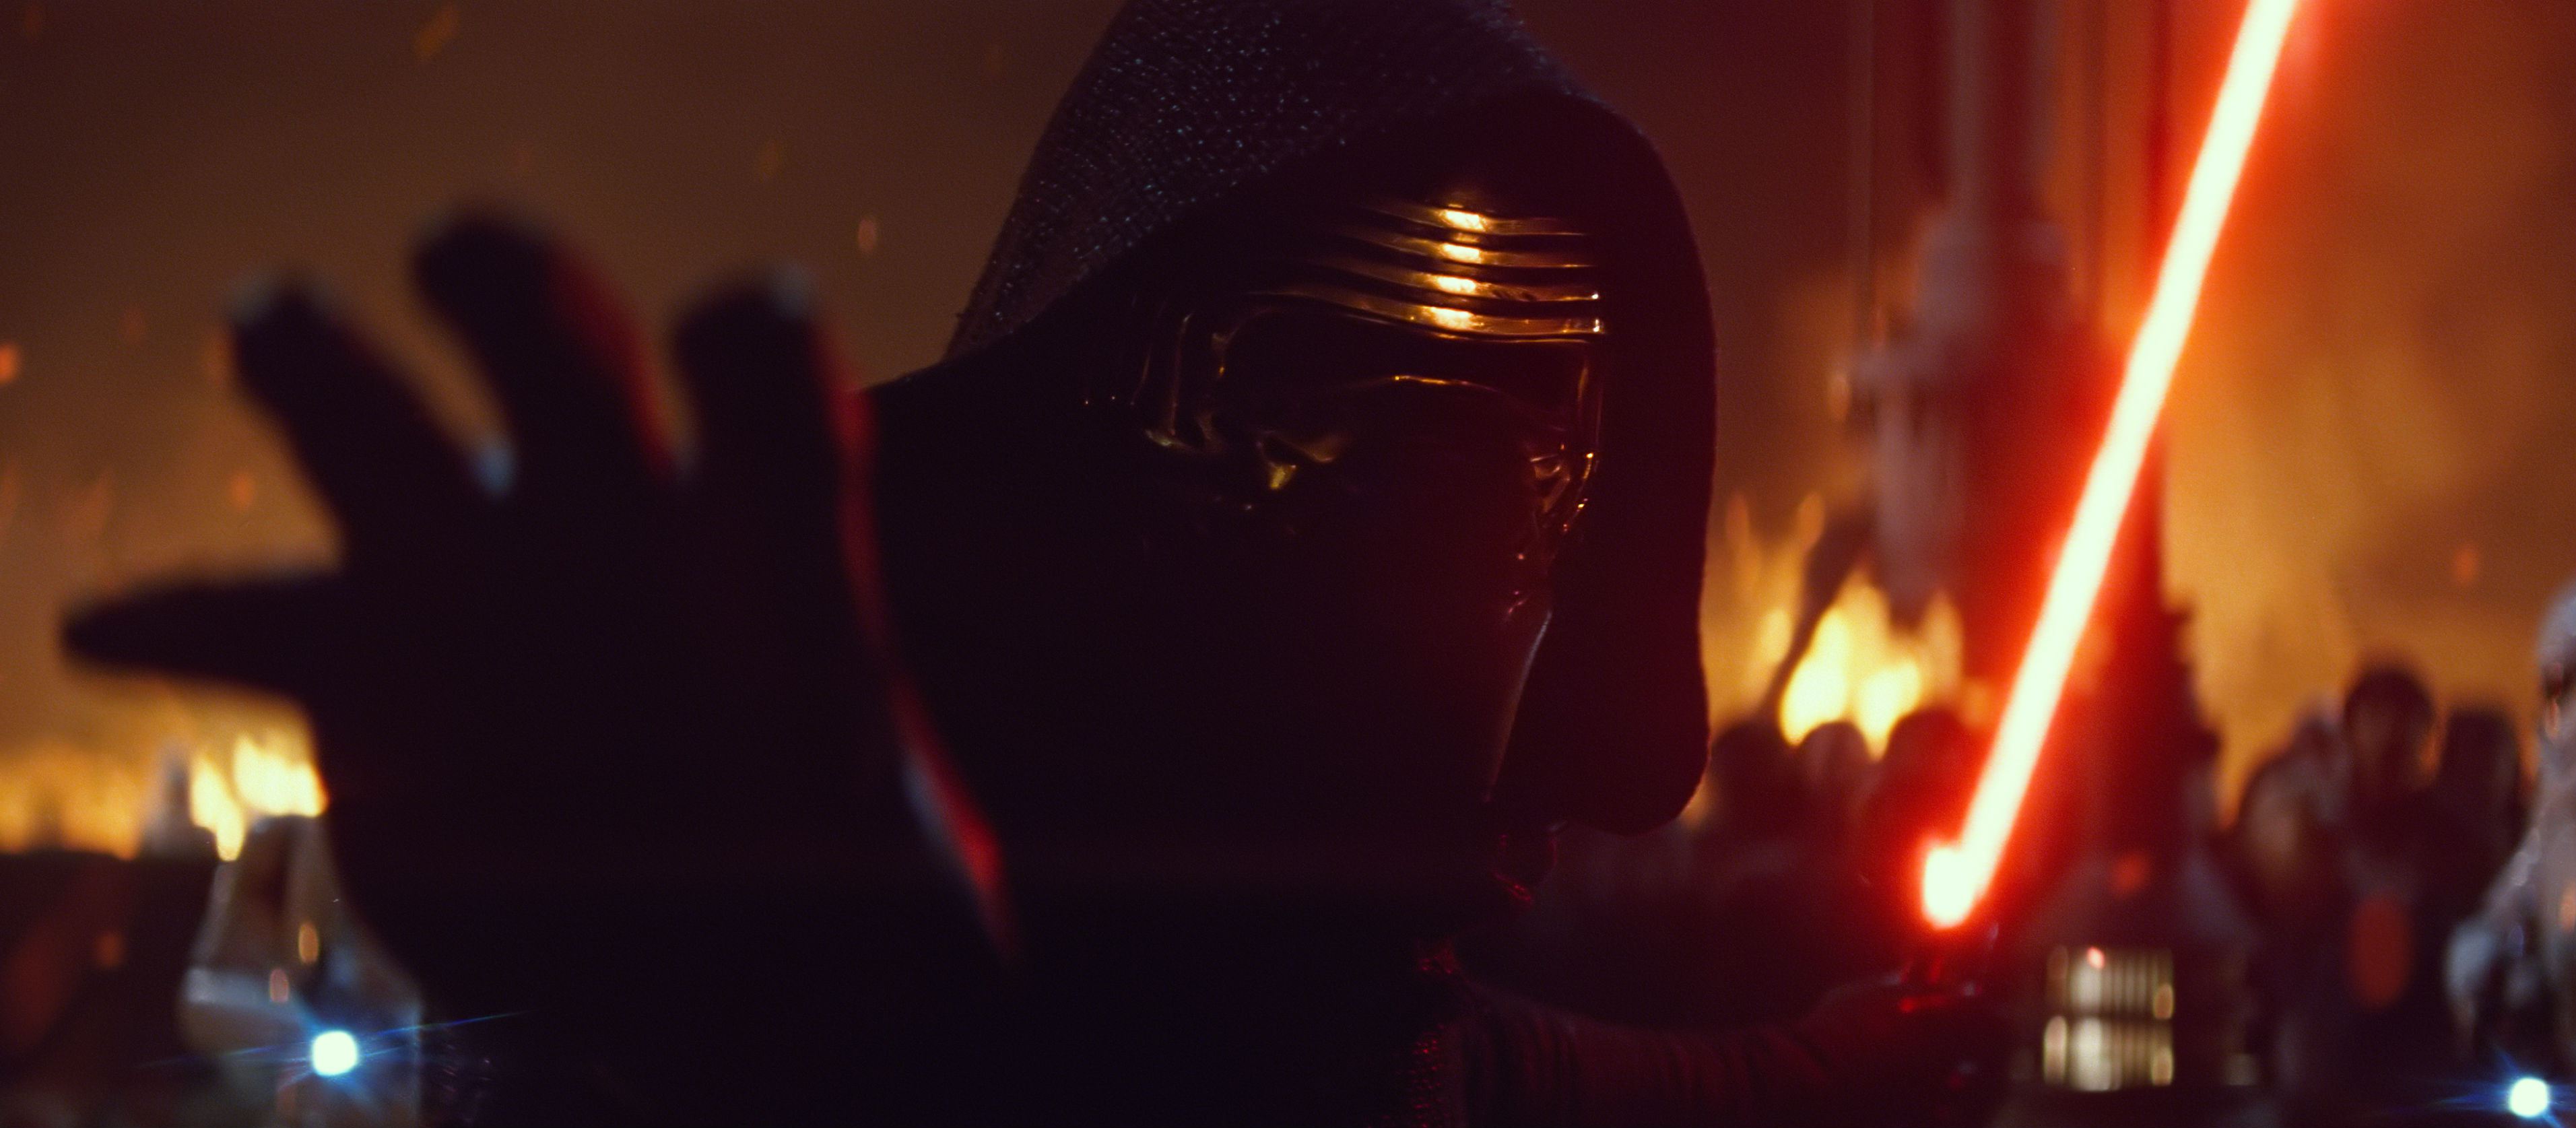 See Kylo Ren on Star Wars The Force Awakens Merchandise Coming